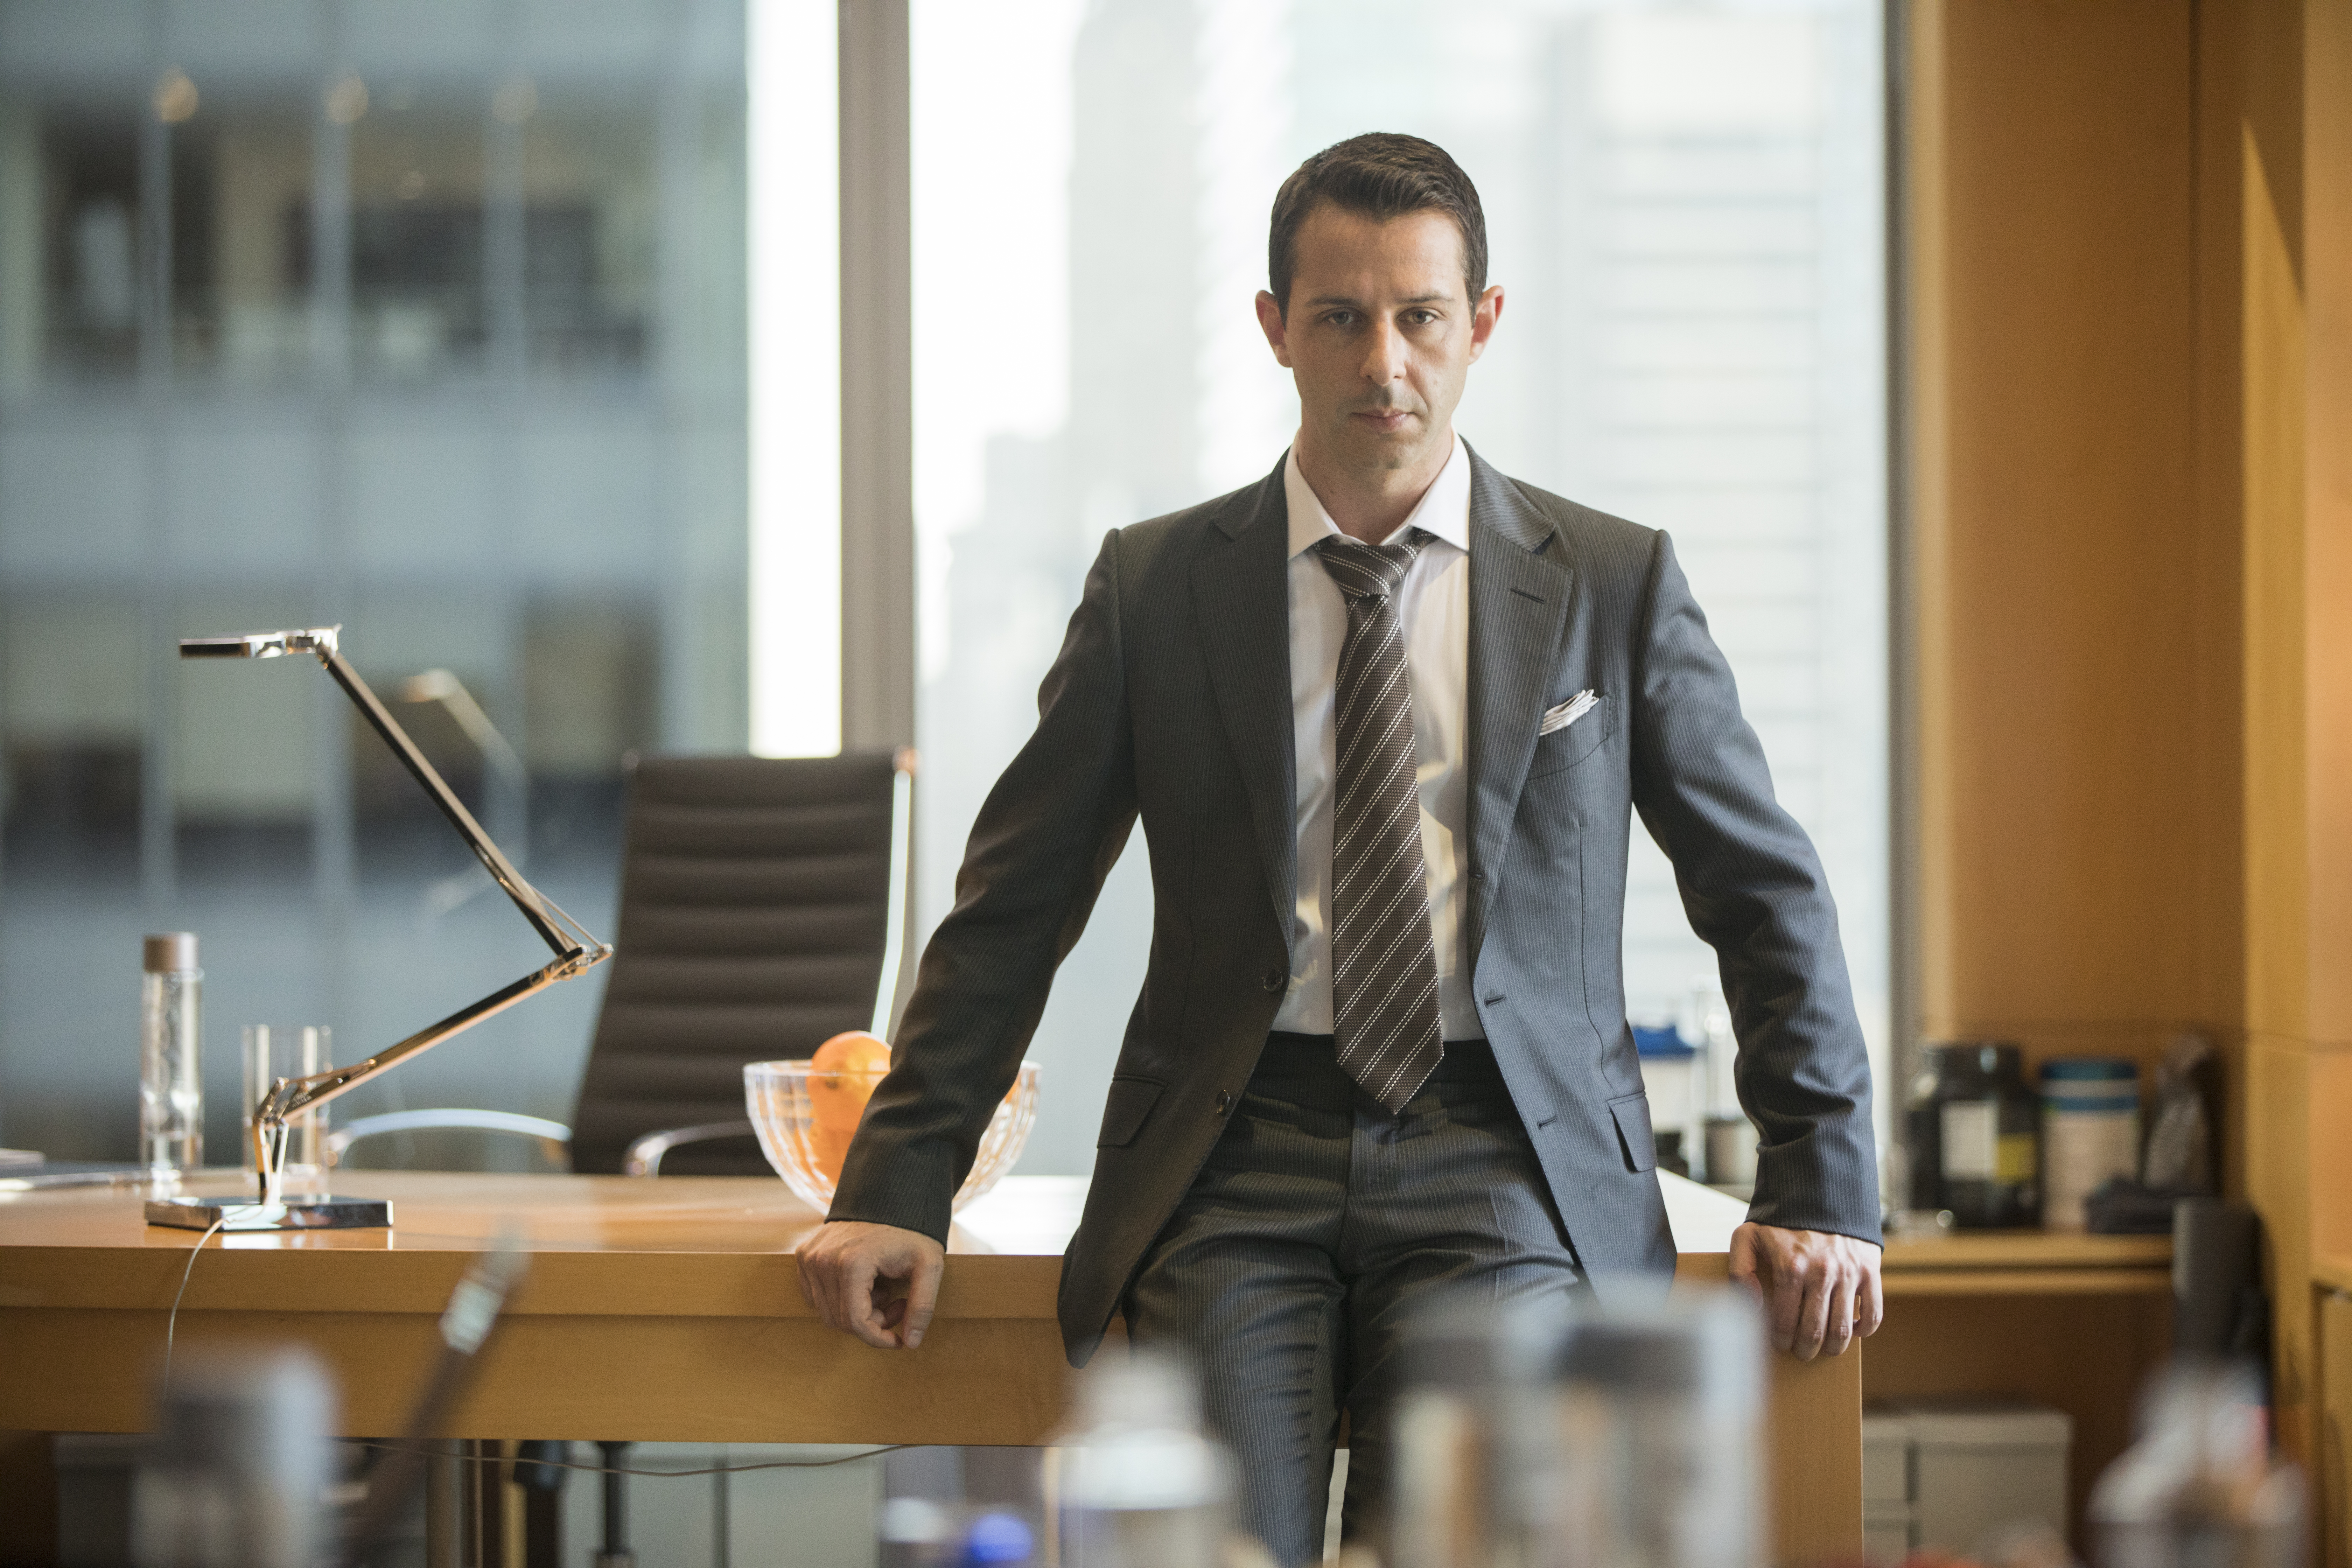 Succession: The Complete First Season still (HBO)